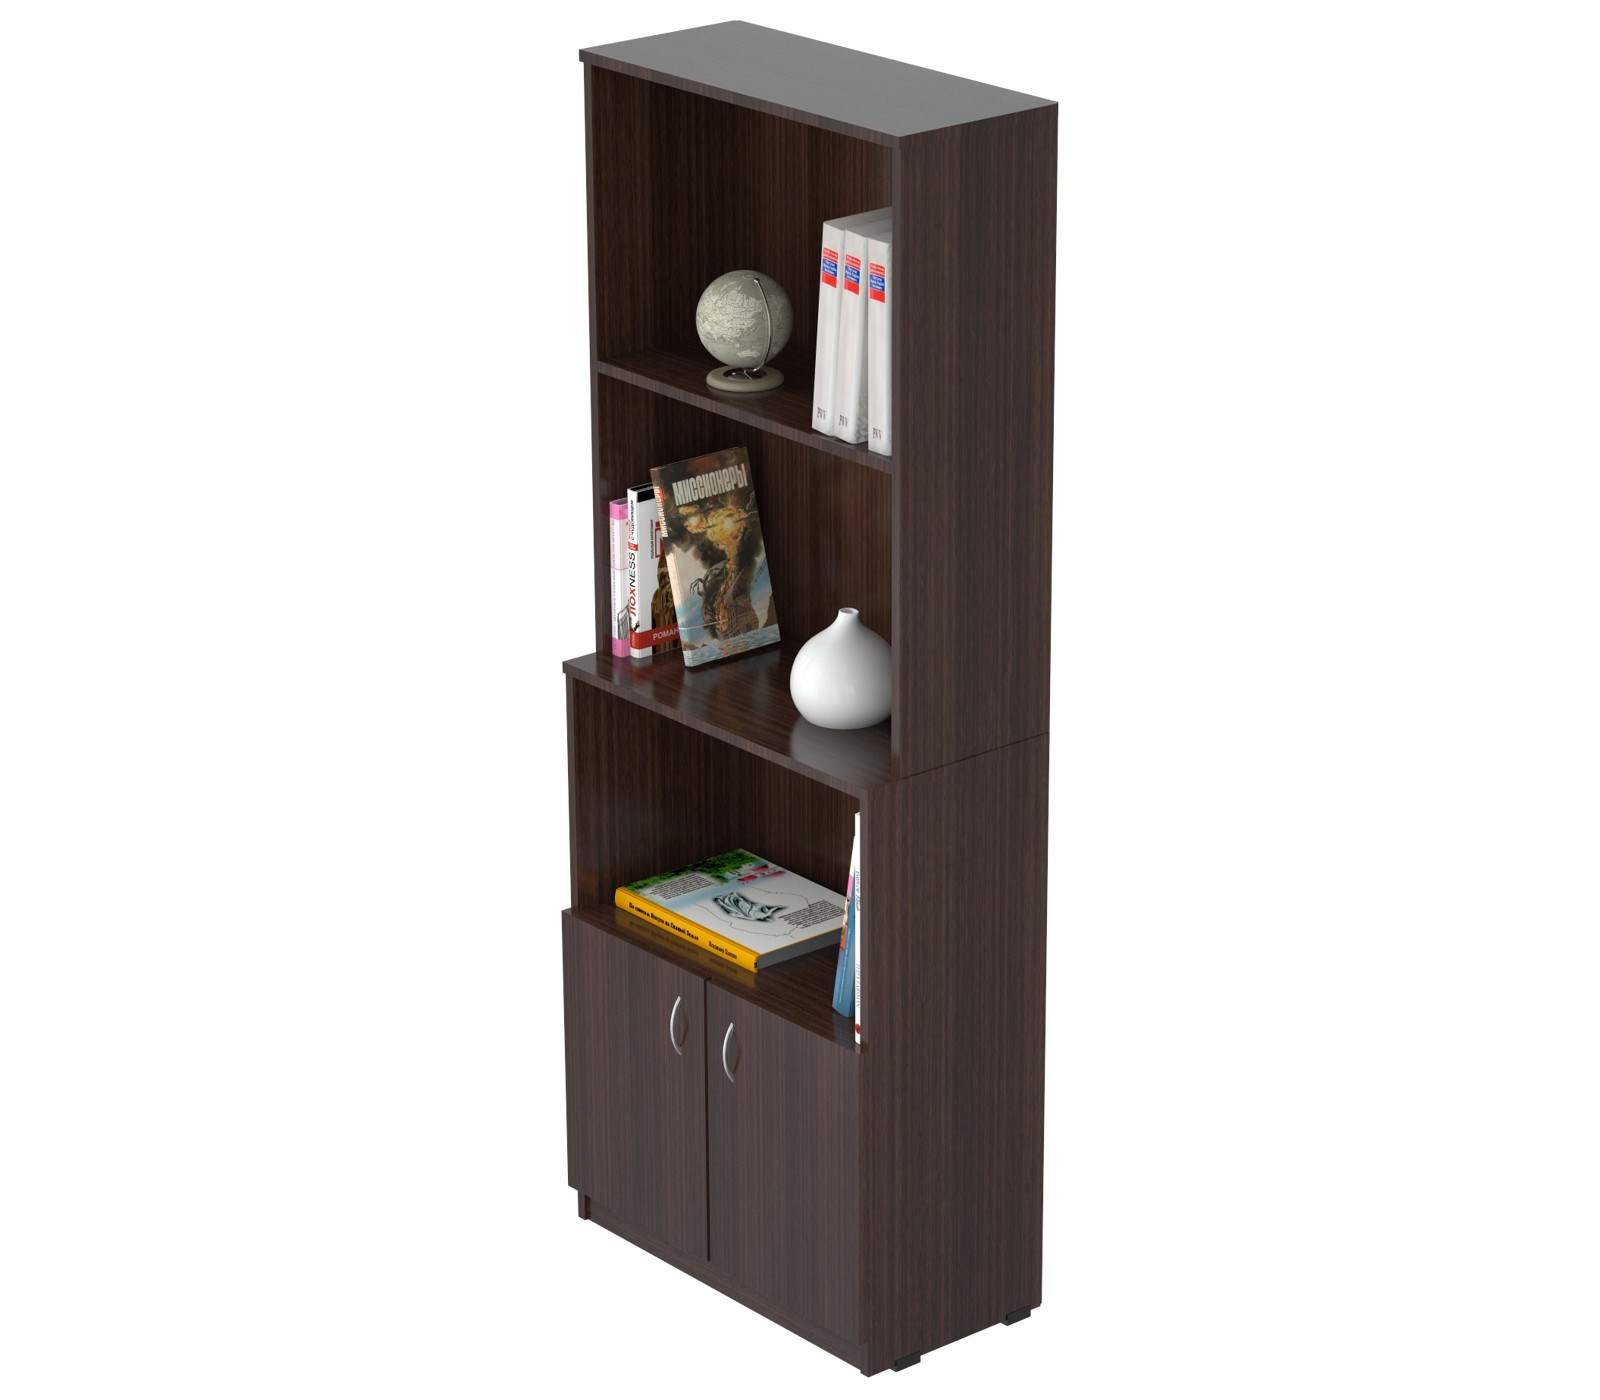 63" Espresso Melamine and Engineered Wood Bookcase with a Storage Area